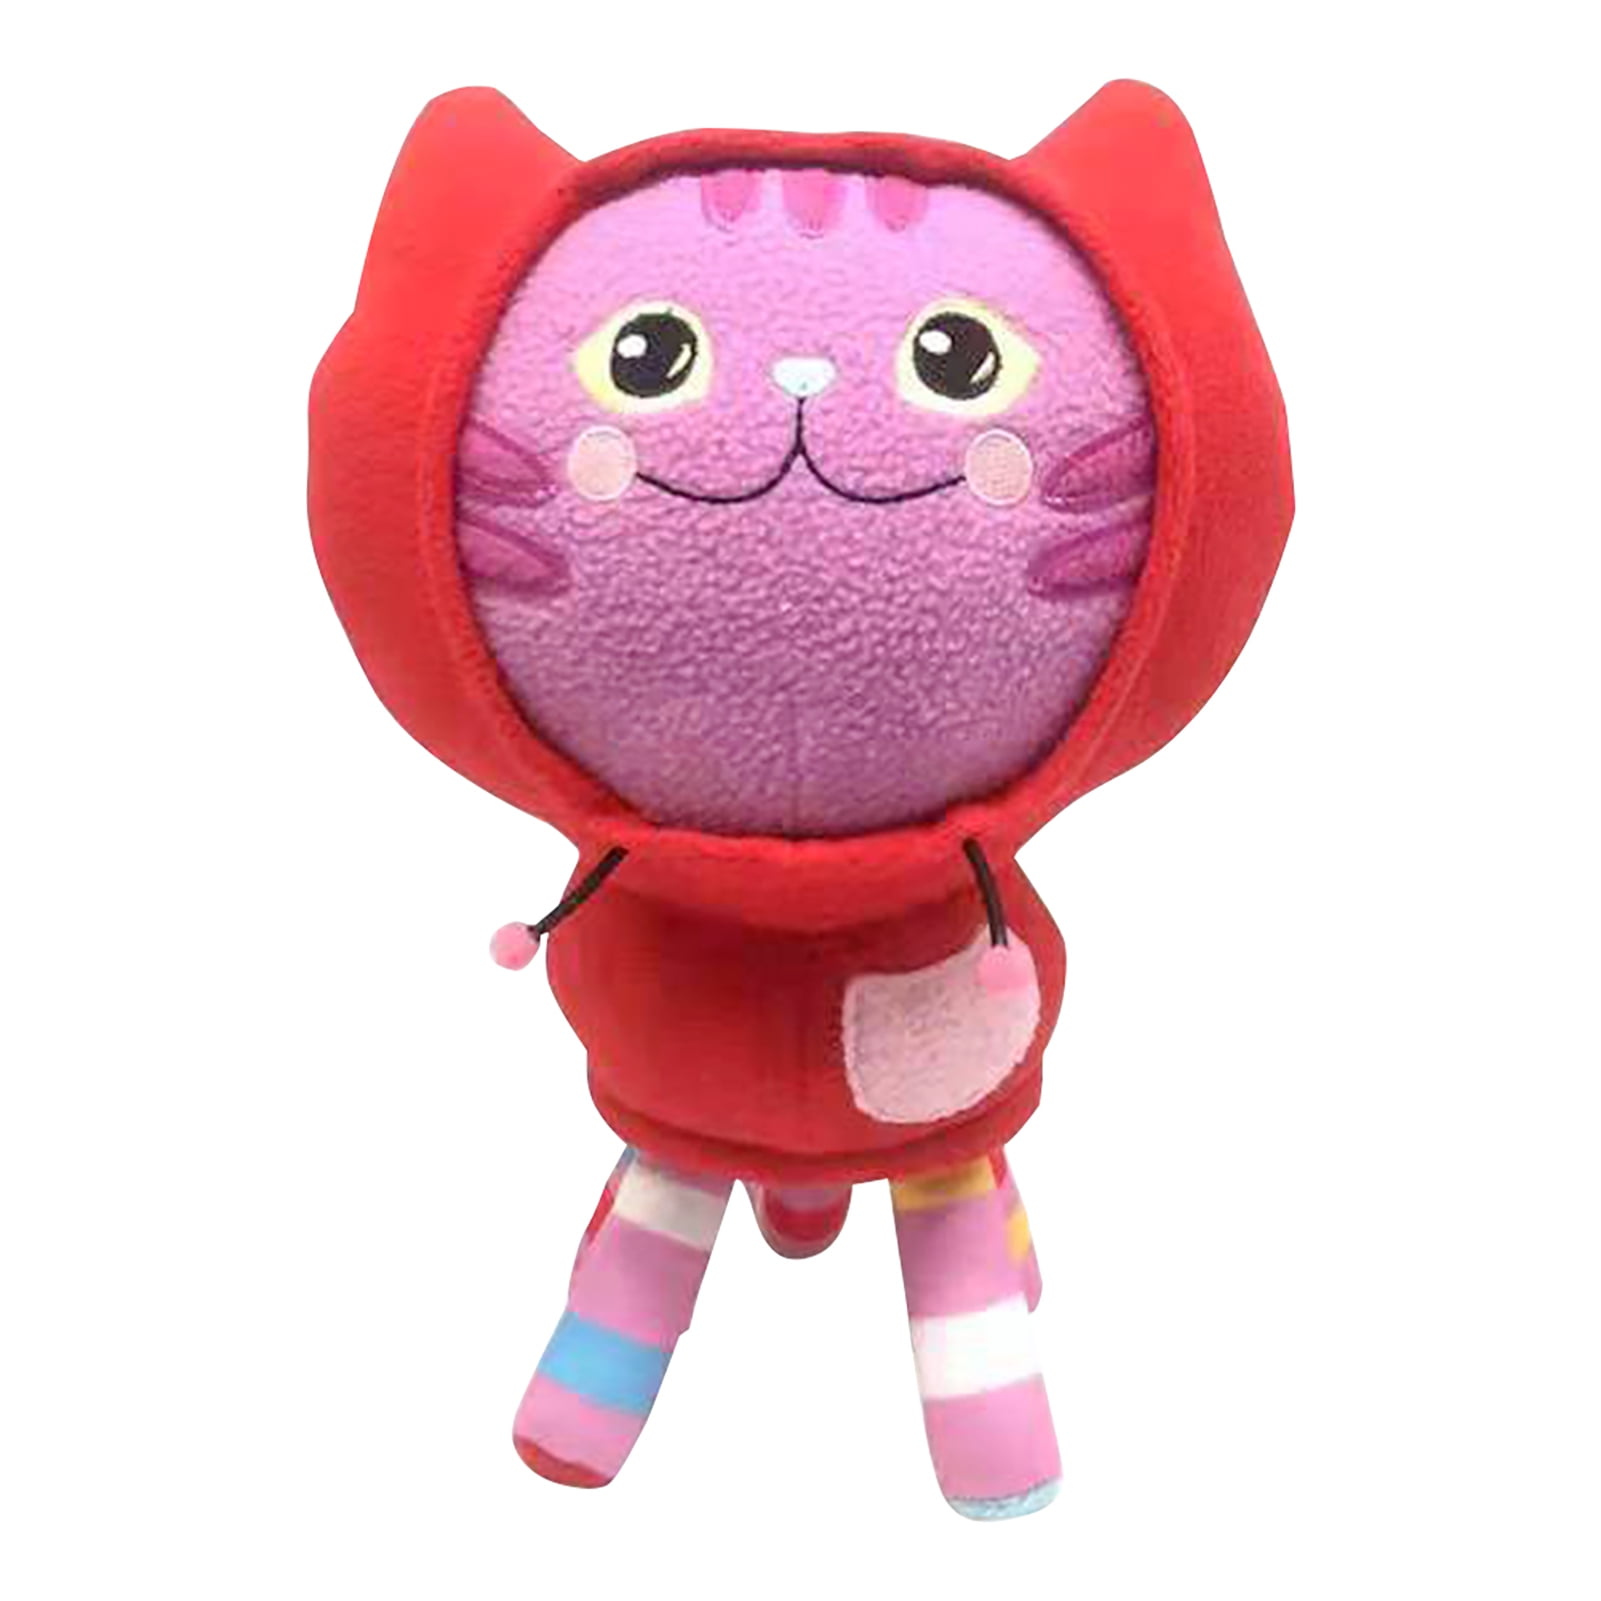 buy-gabby-s-dollhouse-mercat-jumbo-plushpink-smiling-cat-online-at-lowest-price-in-india-270490446